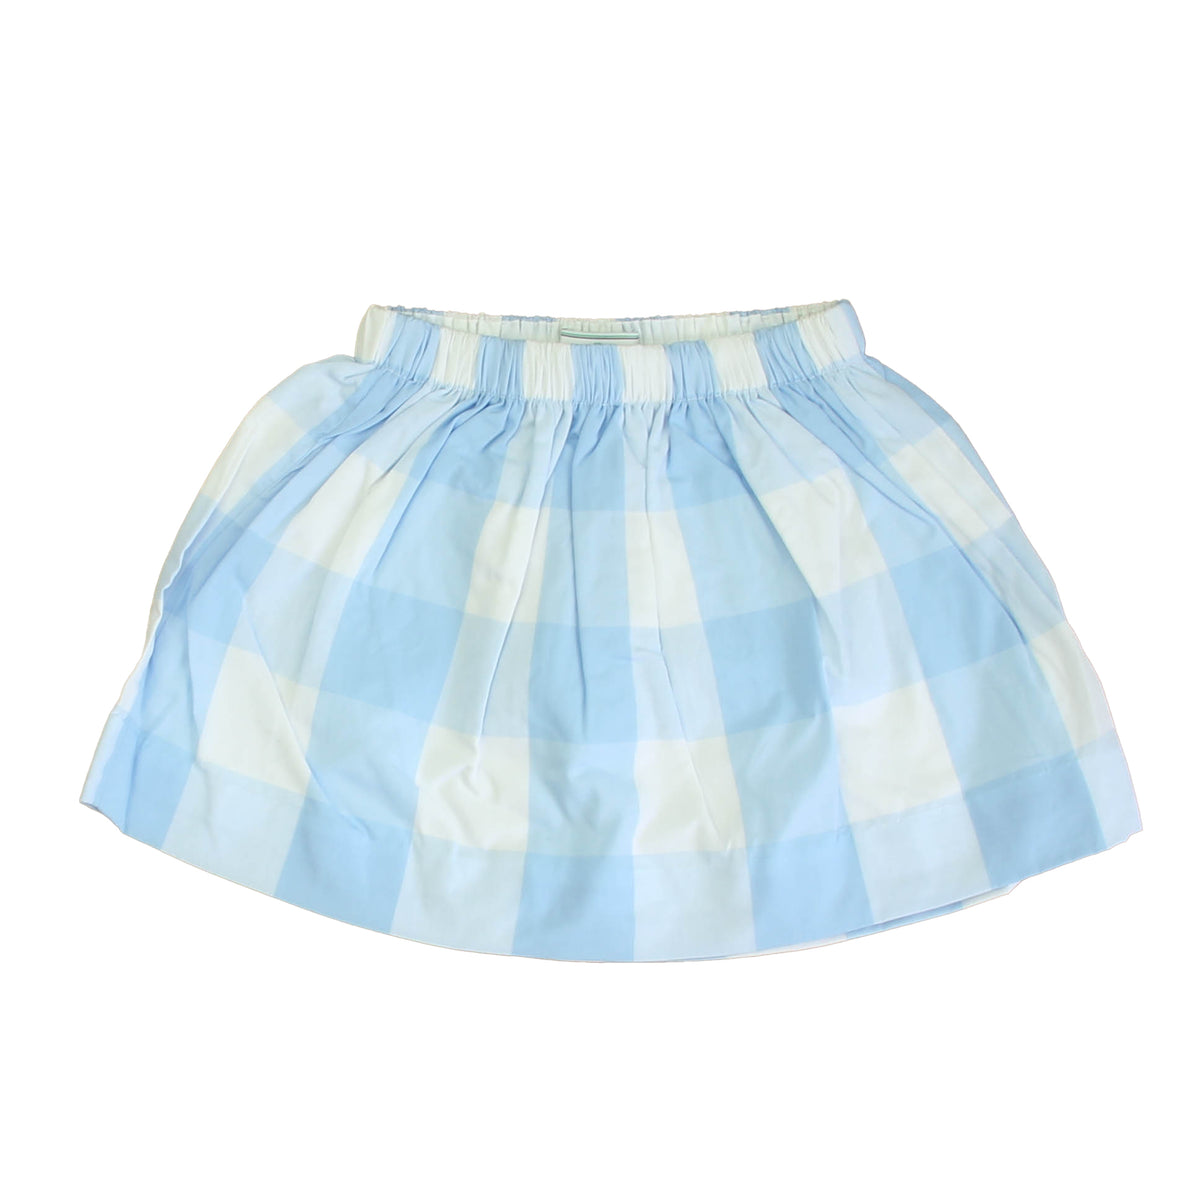 New with Tags: Bluebell Check Skirt size: 2-5T -- FINAL SALE